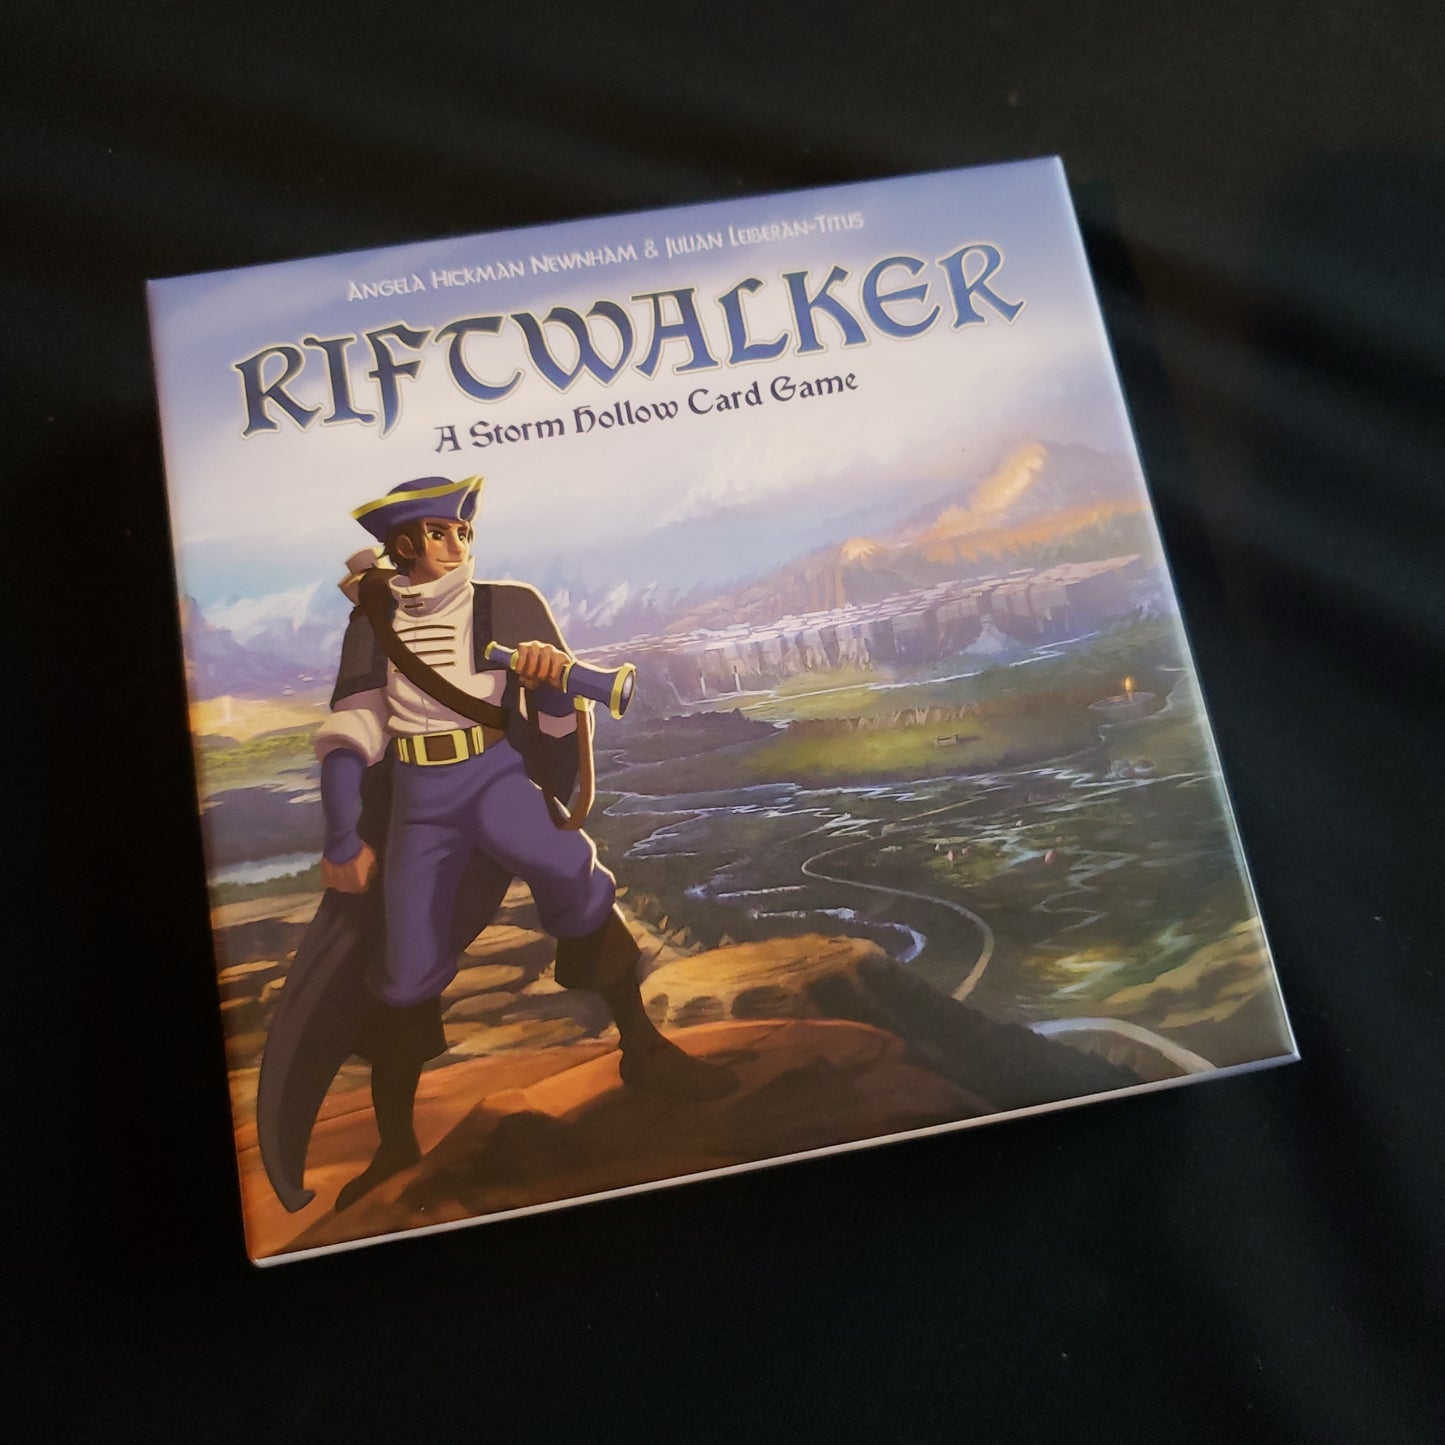 Image shows the front cover of the box of the Riftwalker card game